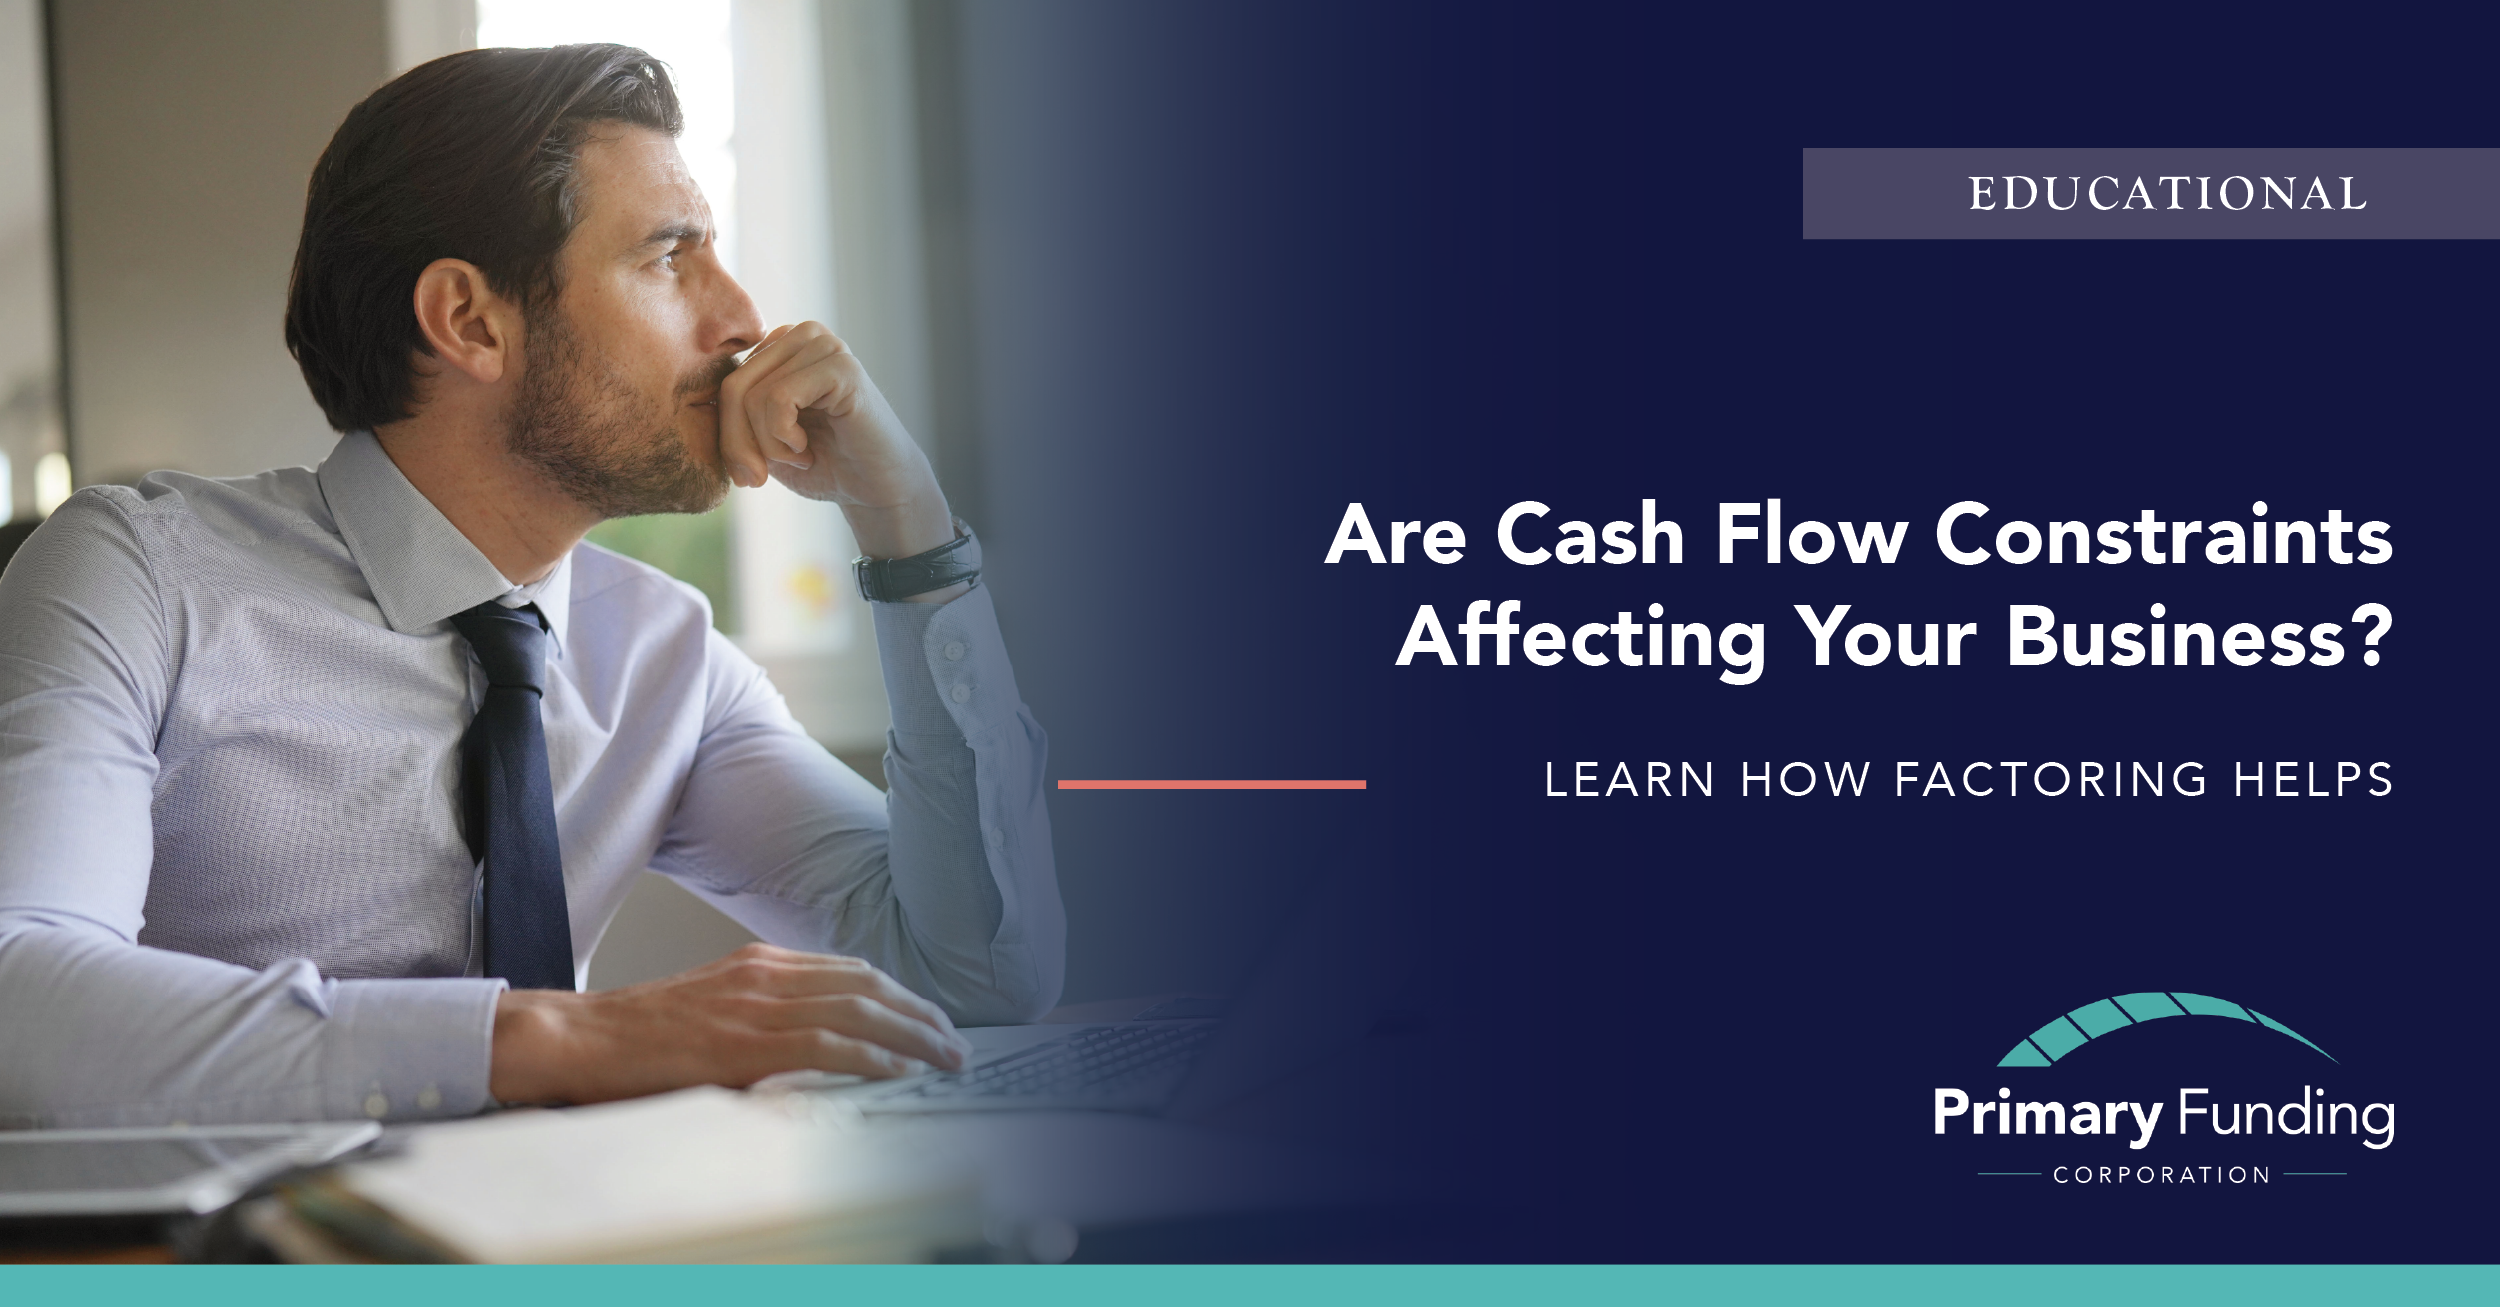 Are These Cashflow Constraints Impacting Your Business? How Factoring Helps